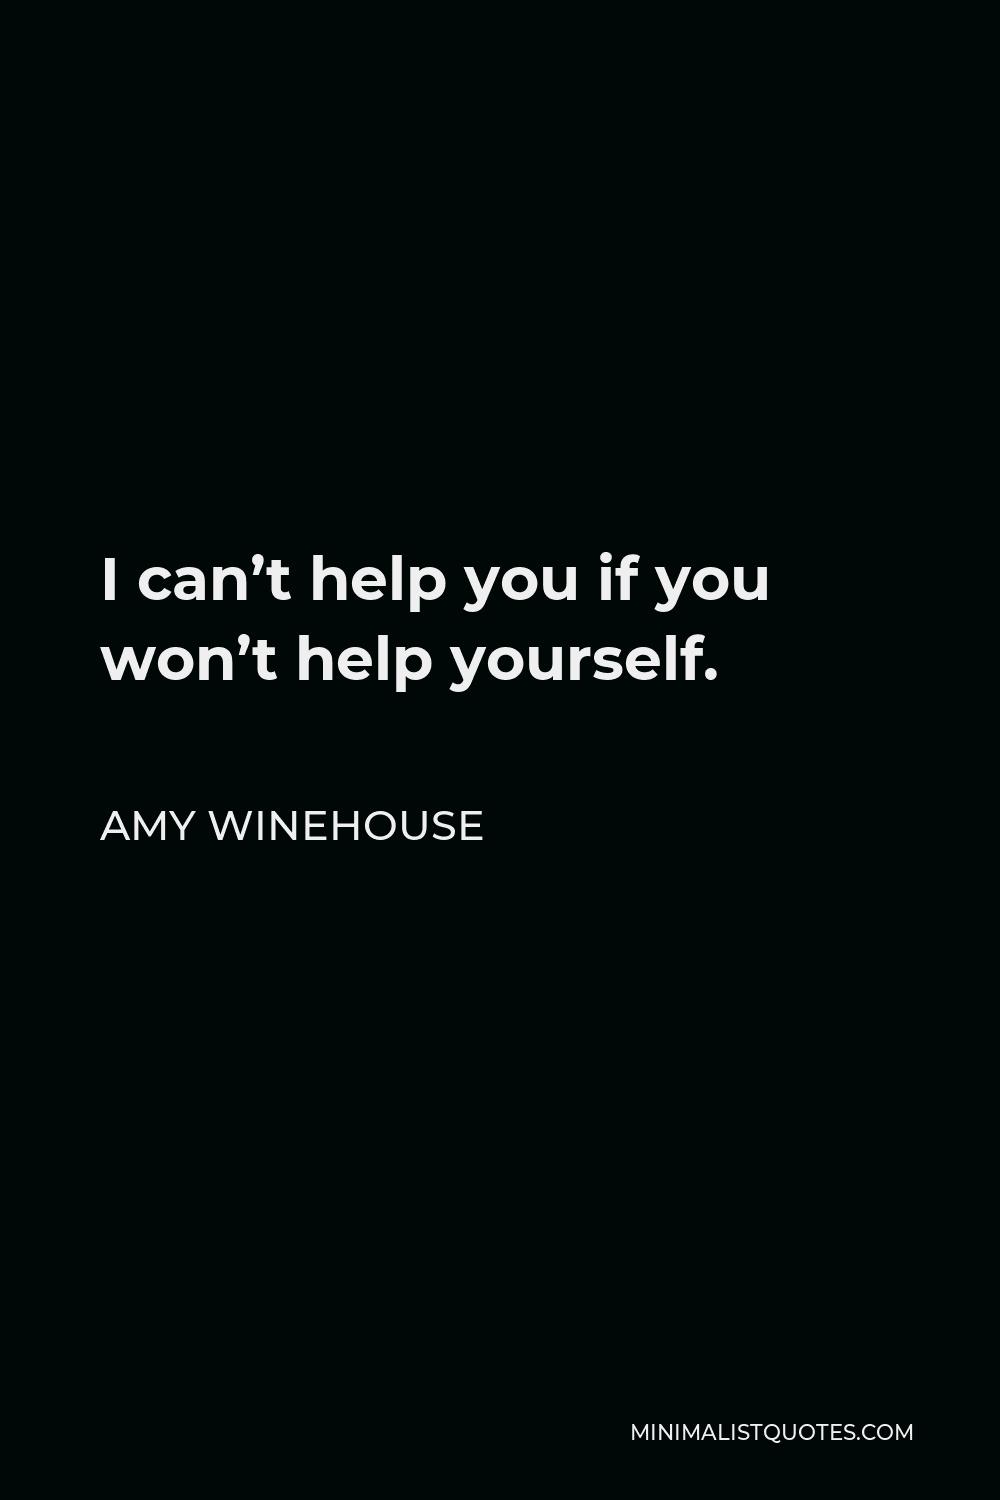 Amy Winehouse Quote - I can’t help you if you won’t help yourself.